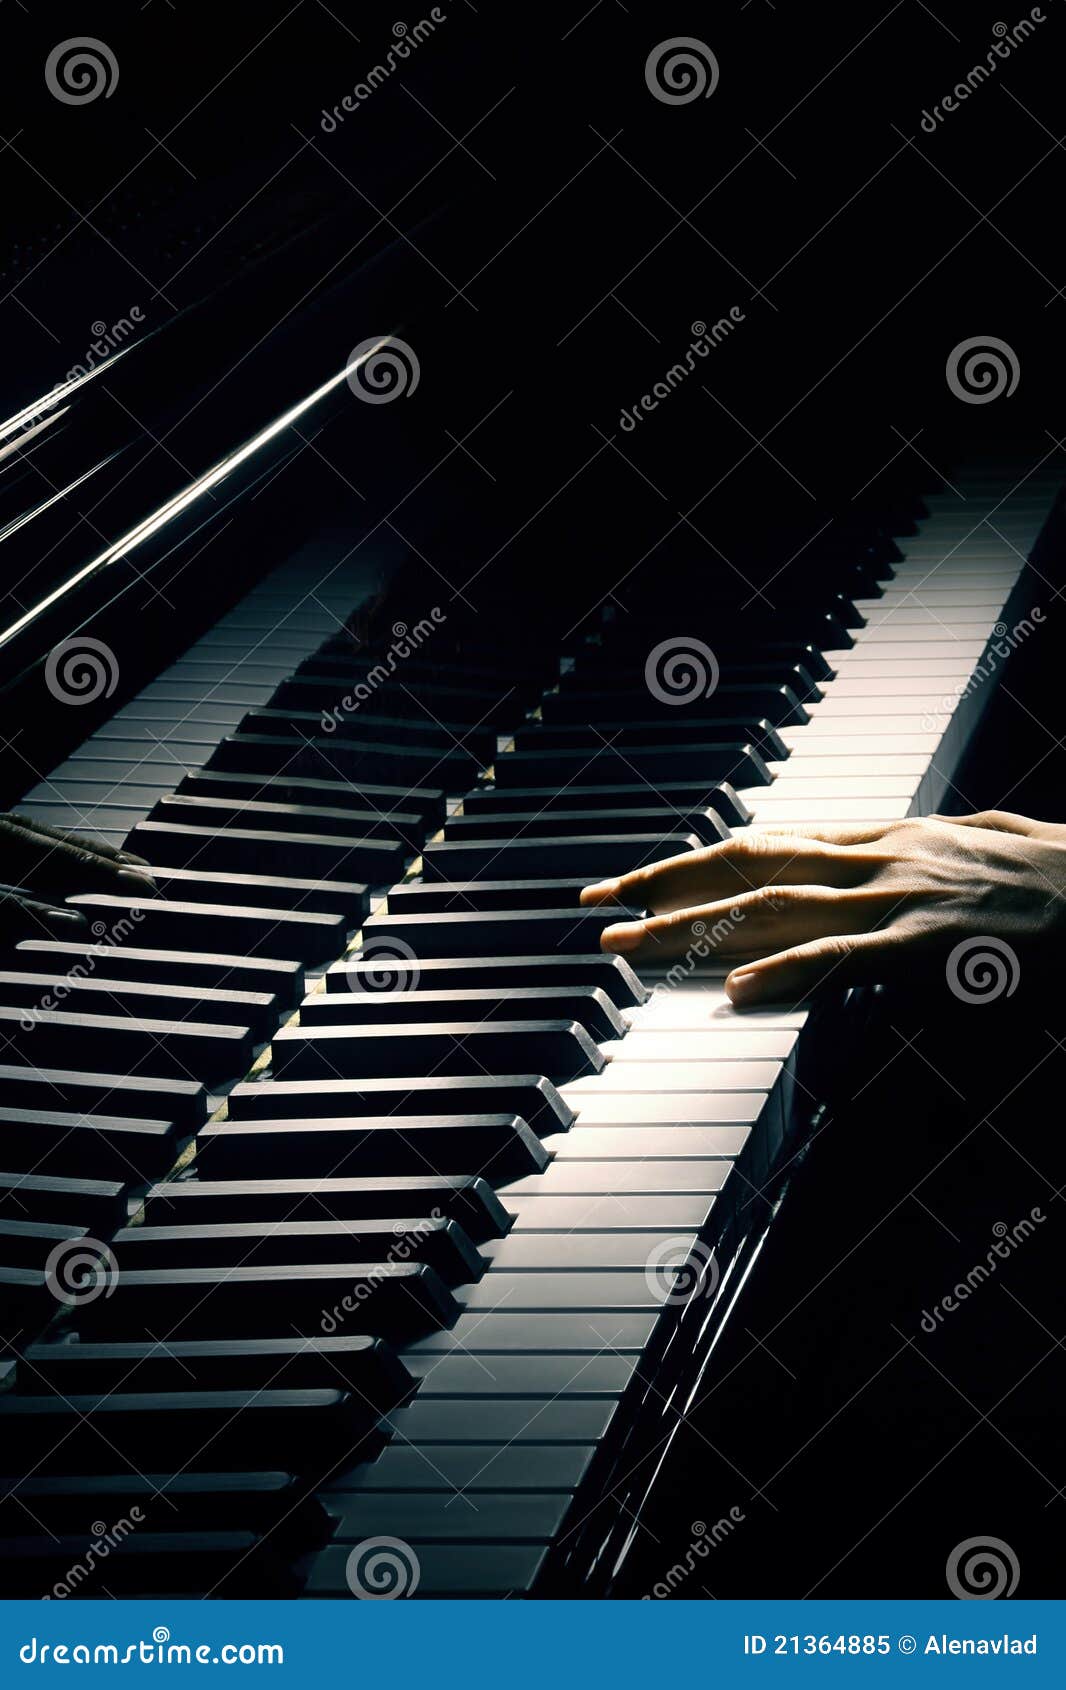 piano pianist playing